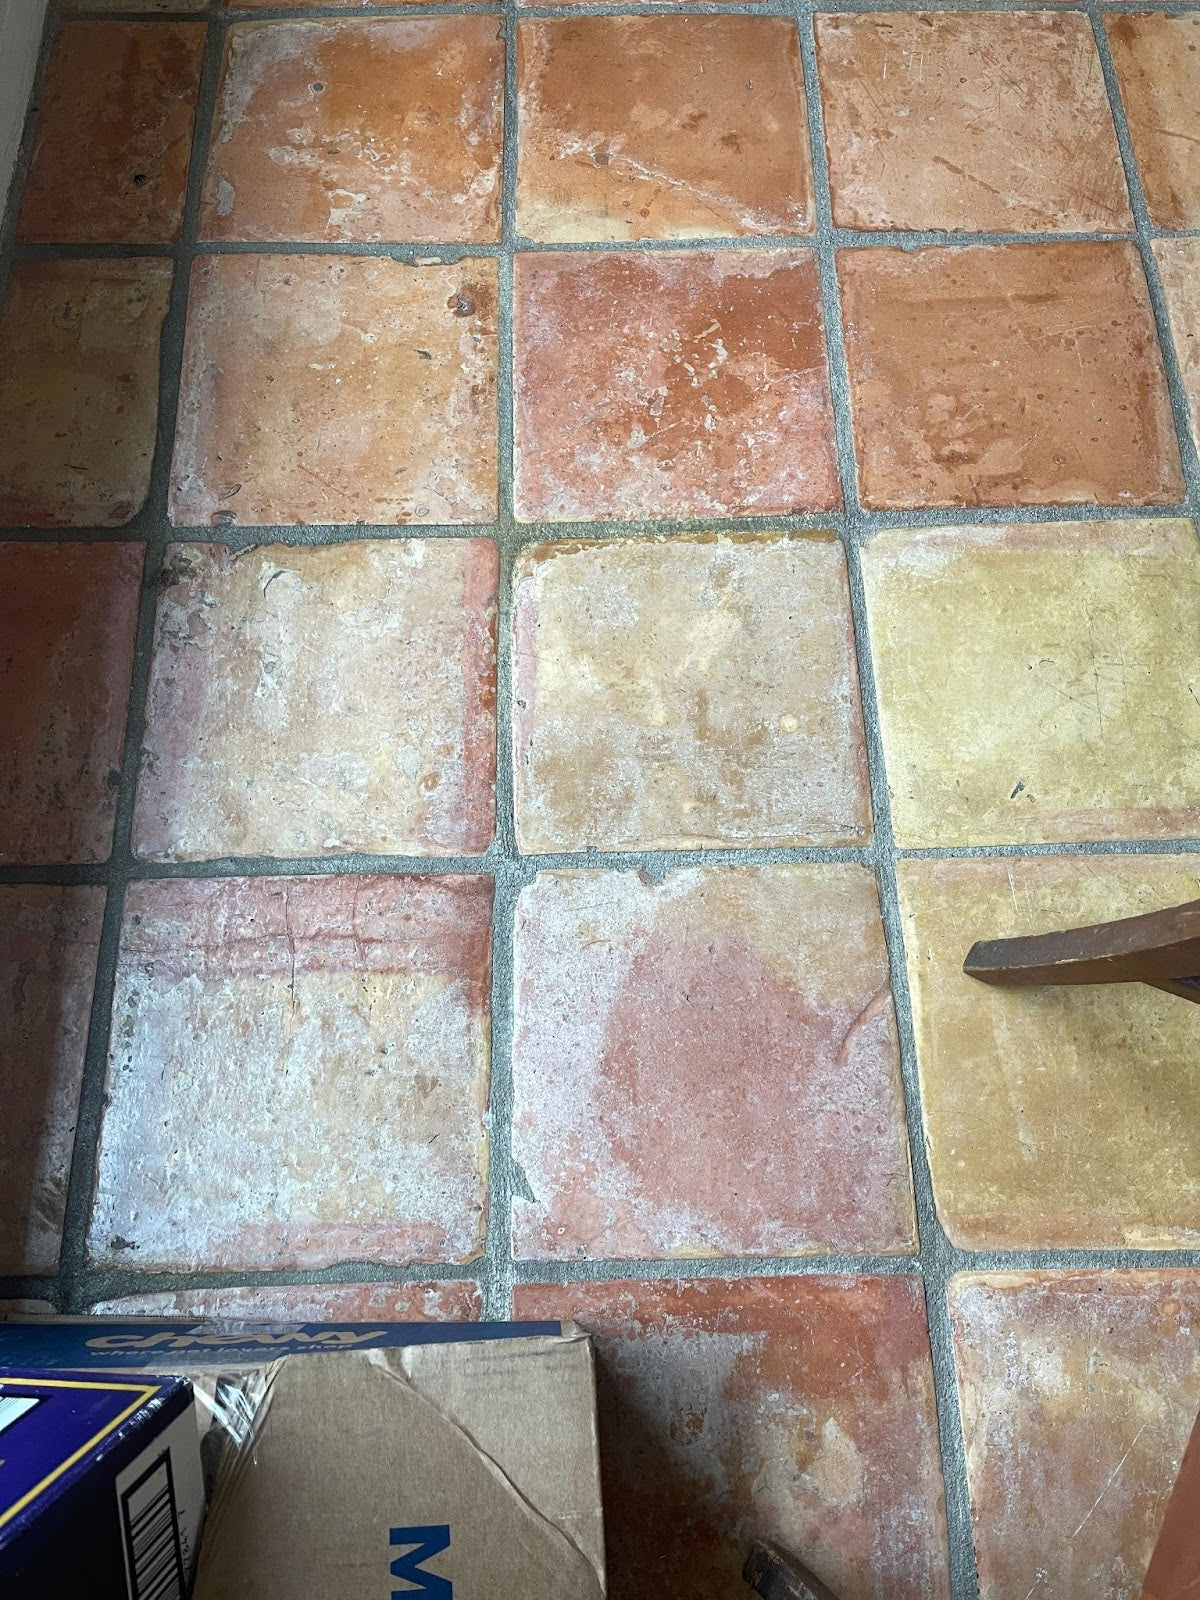 How to blend old terracotta tiles